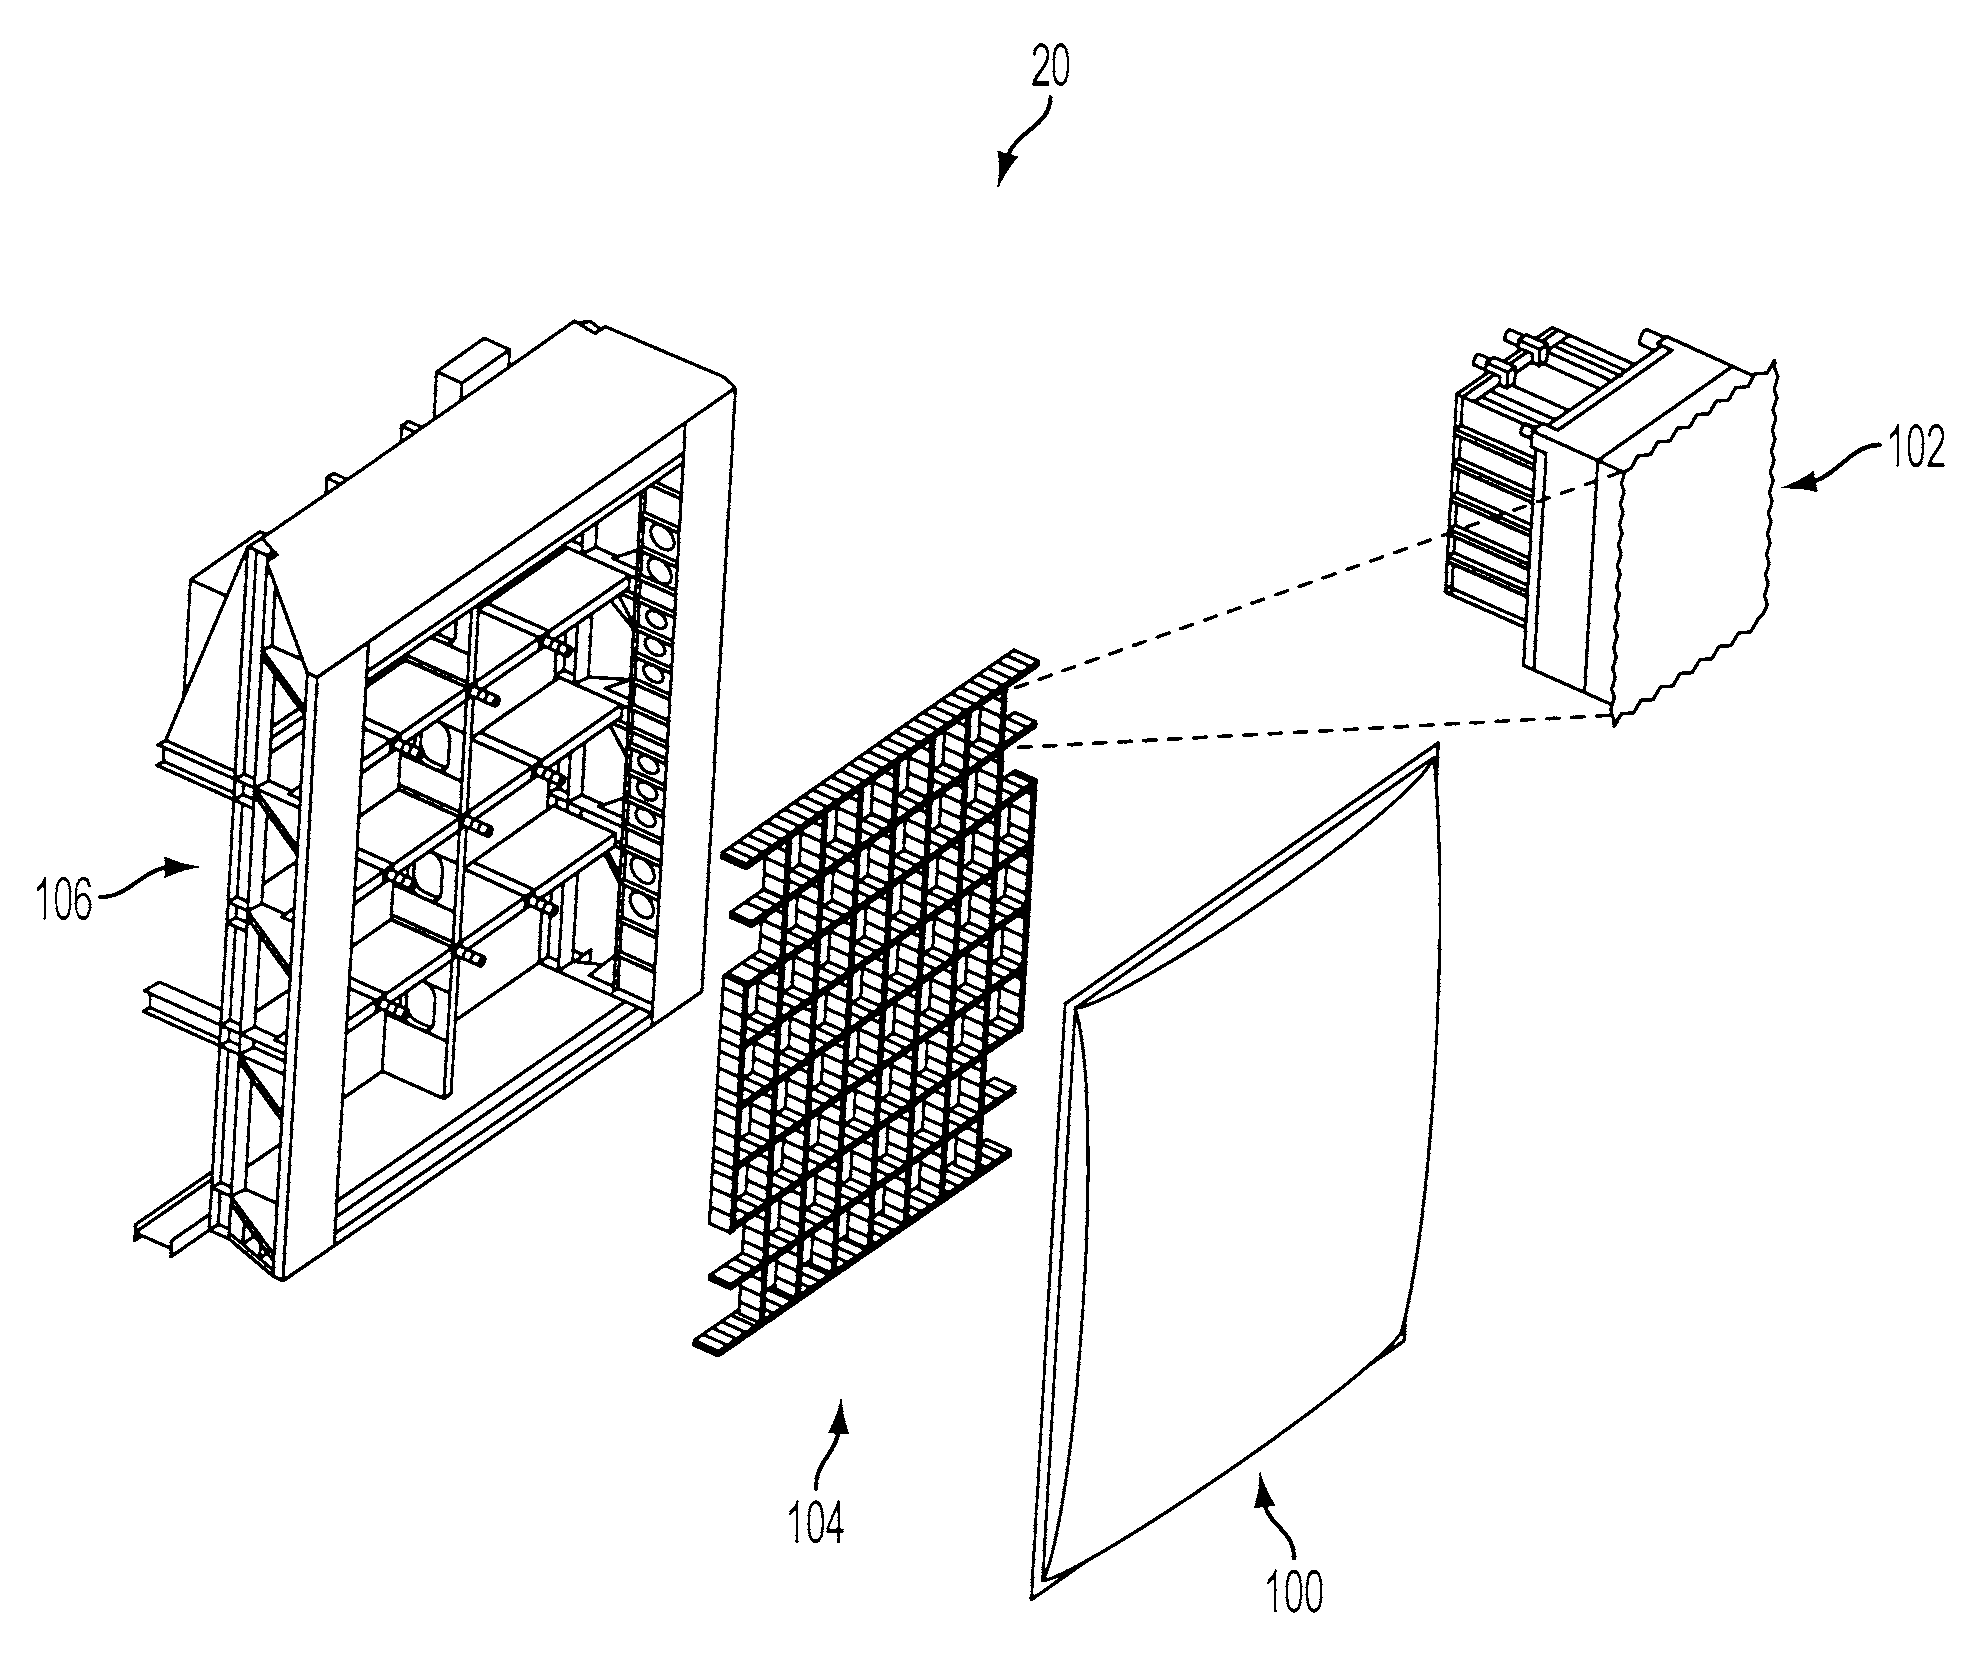 Modular active phased array